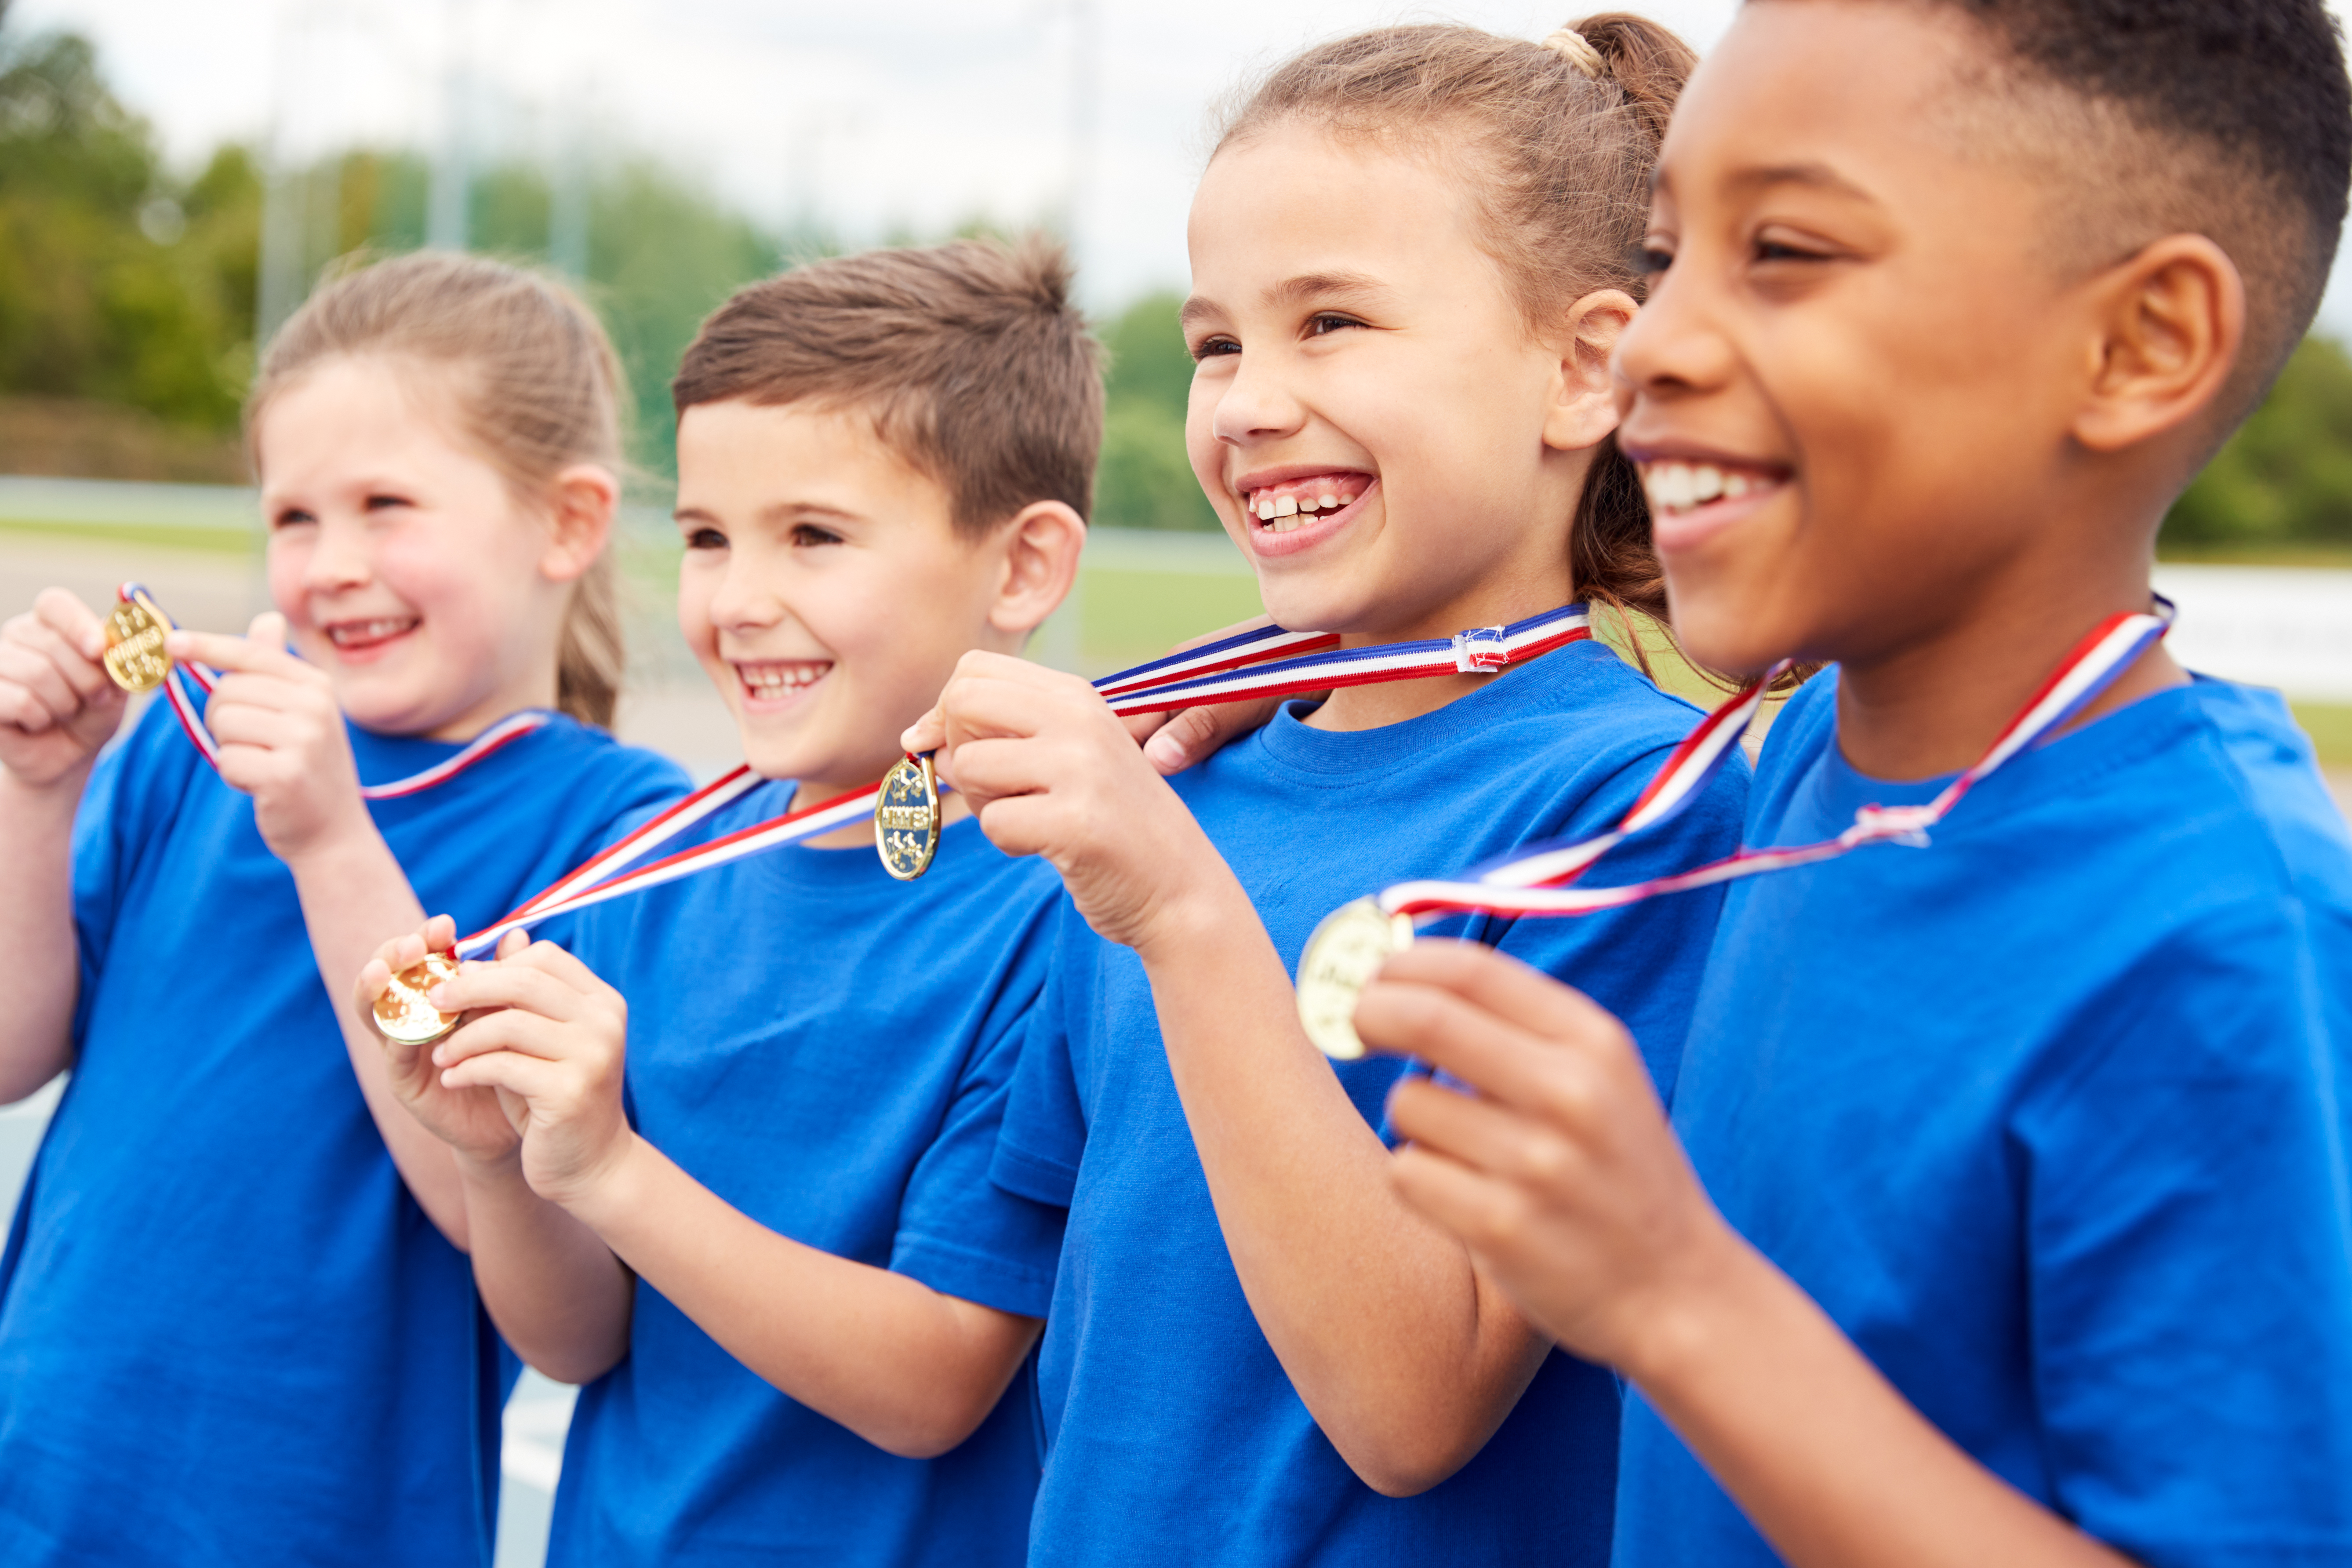 Children Showing Off Winners Medals On Sports Day